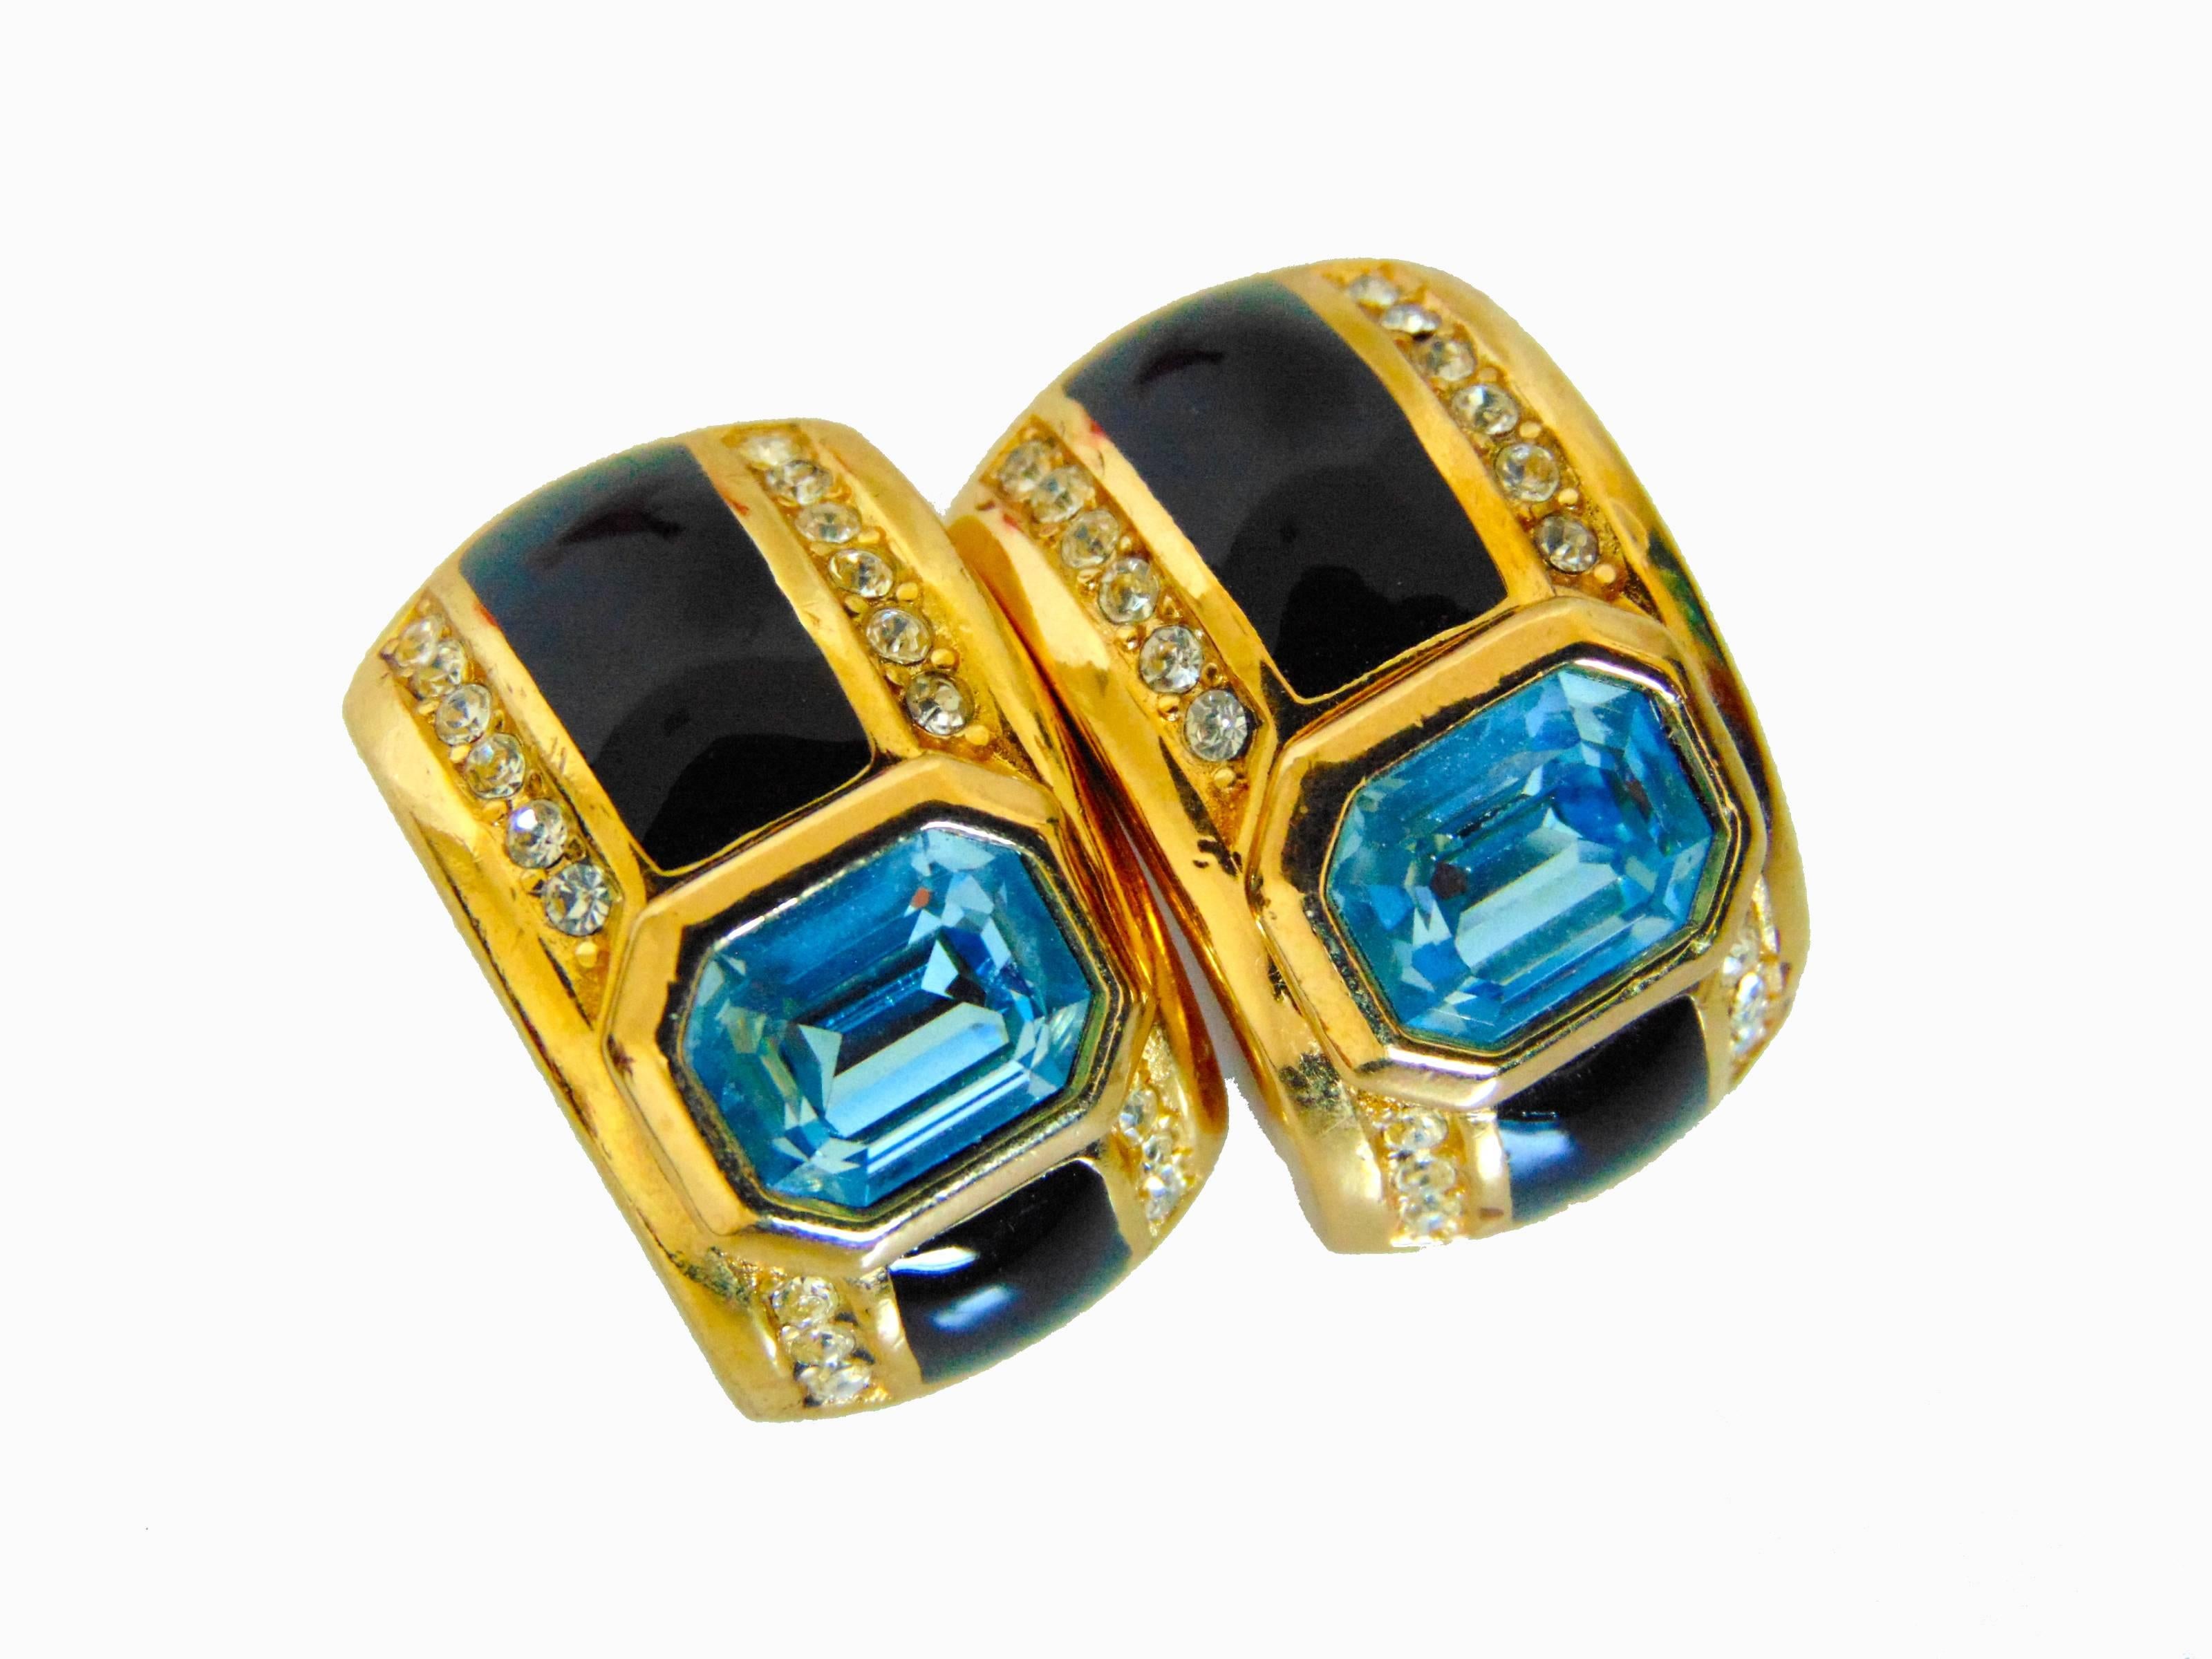 Christian Dior Art Deco Earrings with Faux Sapphire Topaz Crystals 1980s In Good Condition For Sale In Port Saint Lucie, FL